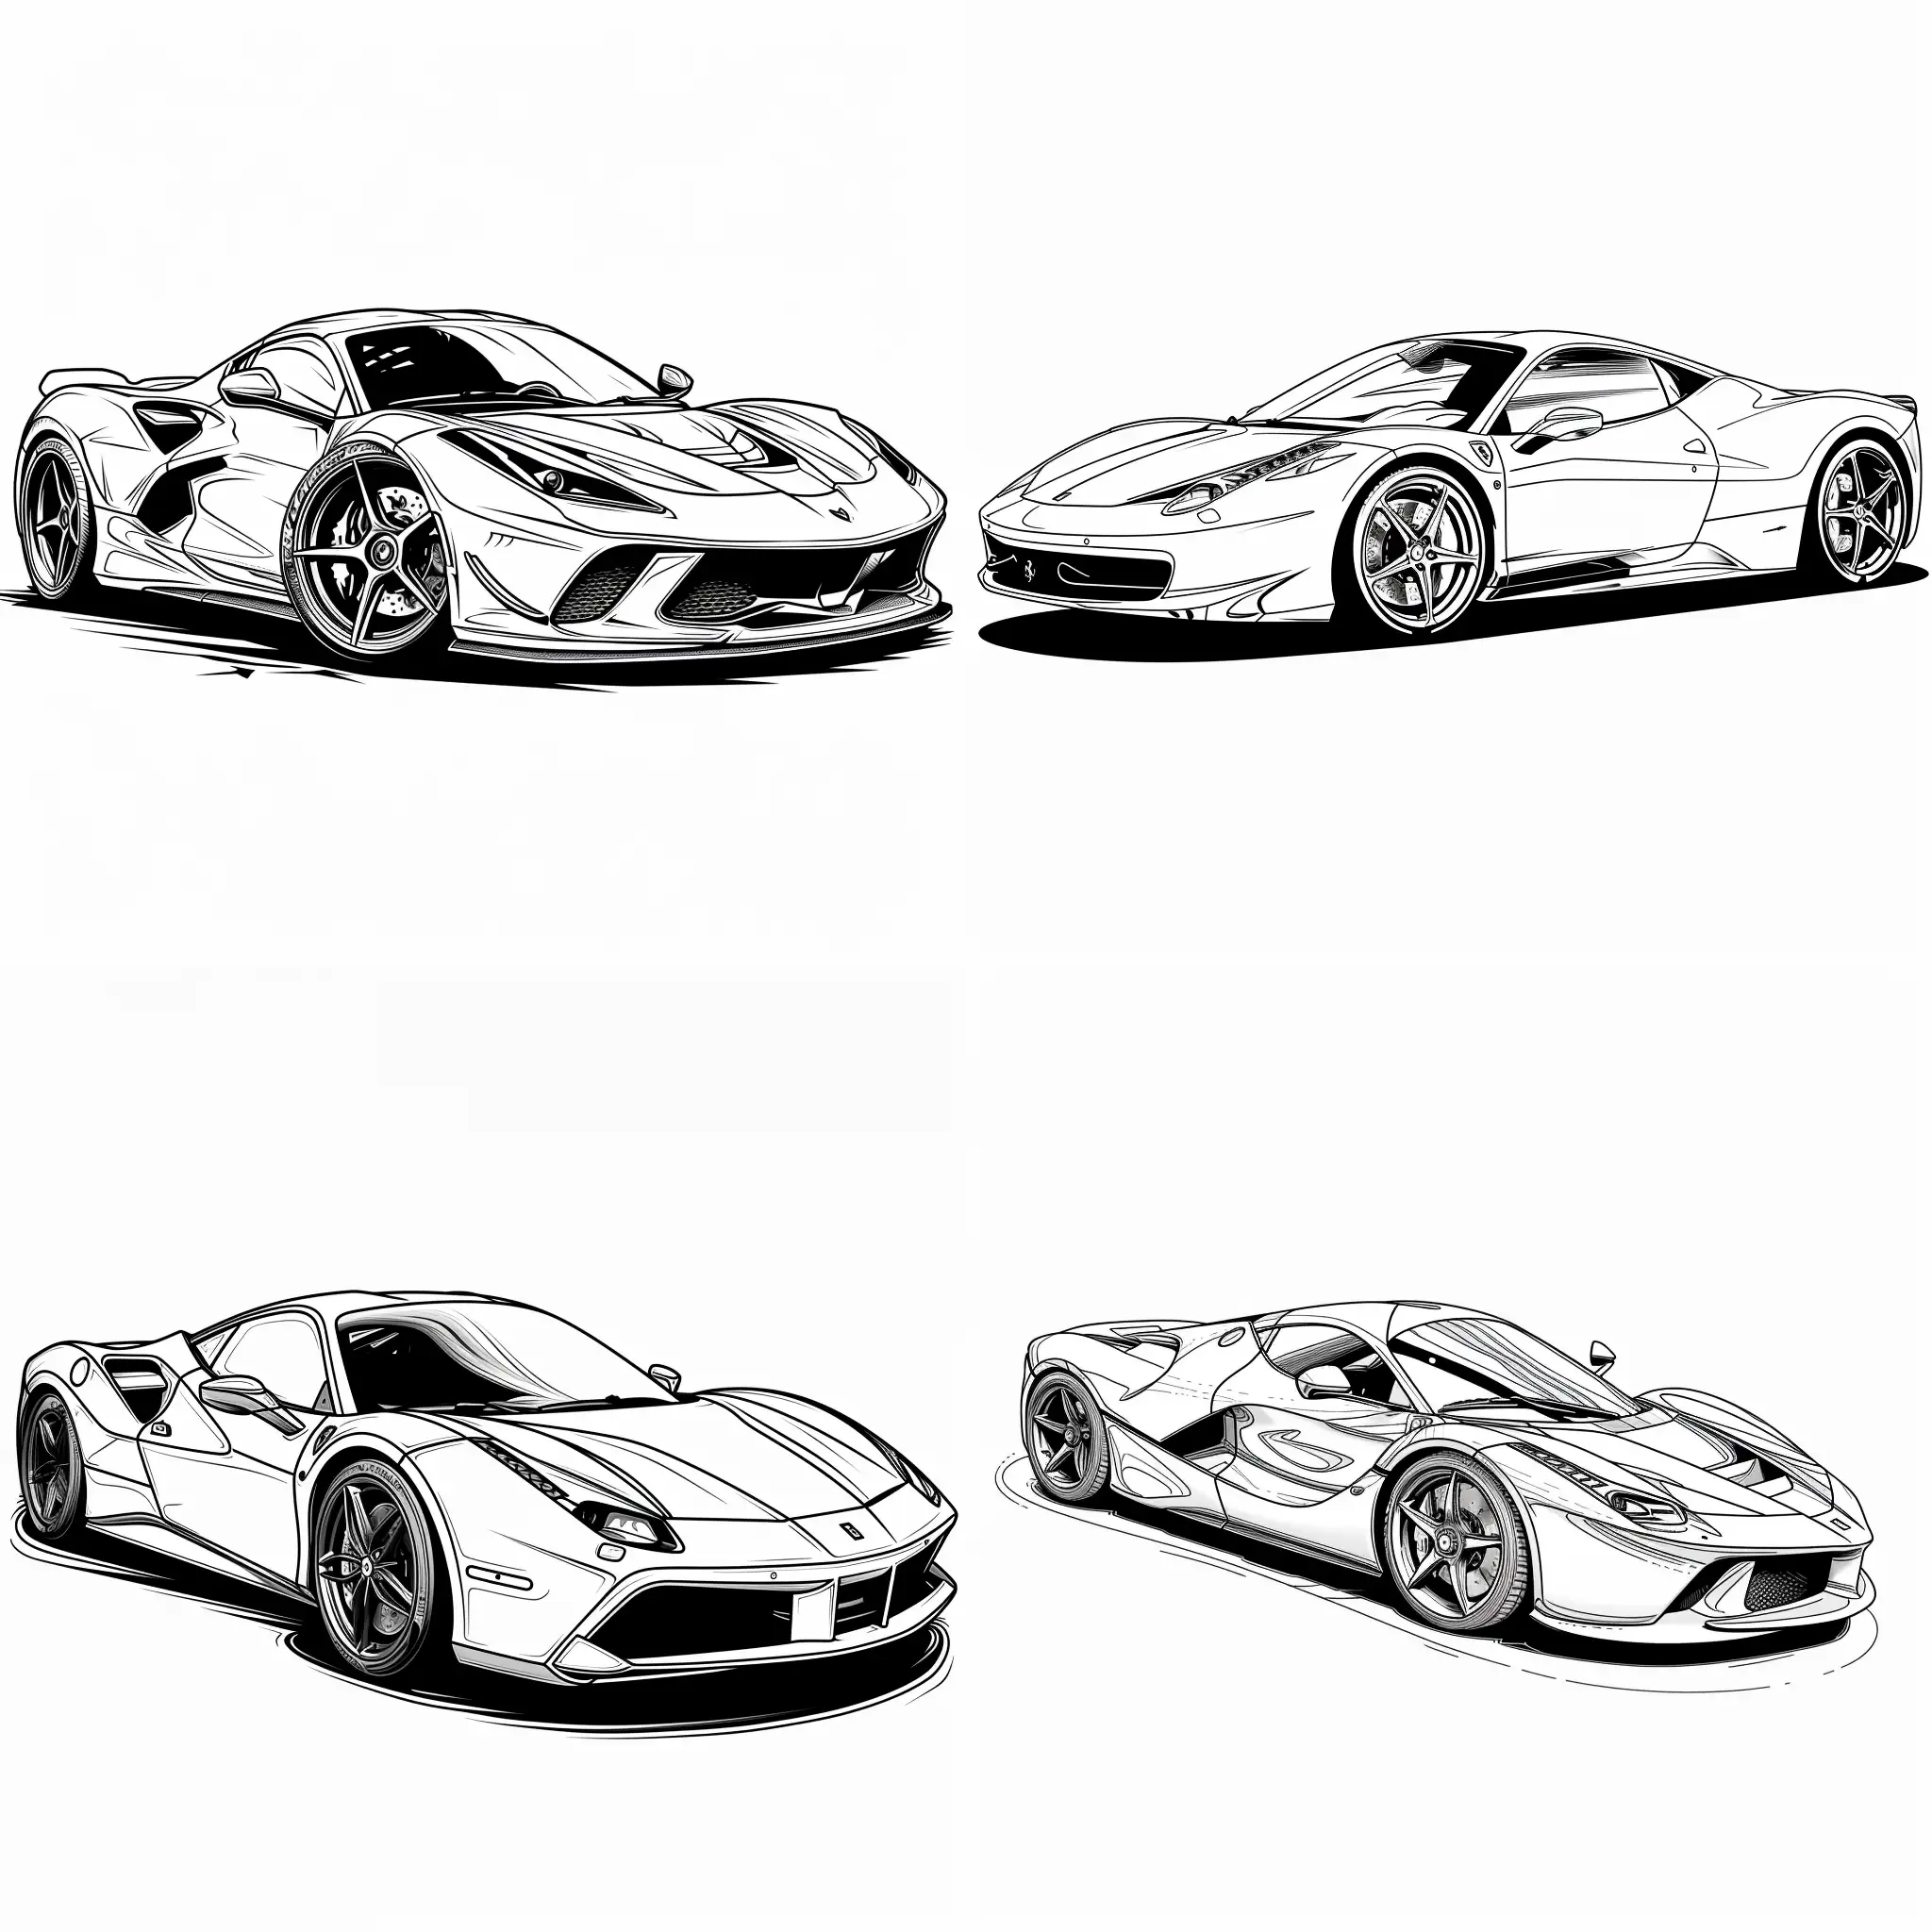 Minimalistic-Coloring-Book-Sleek-Super-Cars-in-Black-and-White